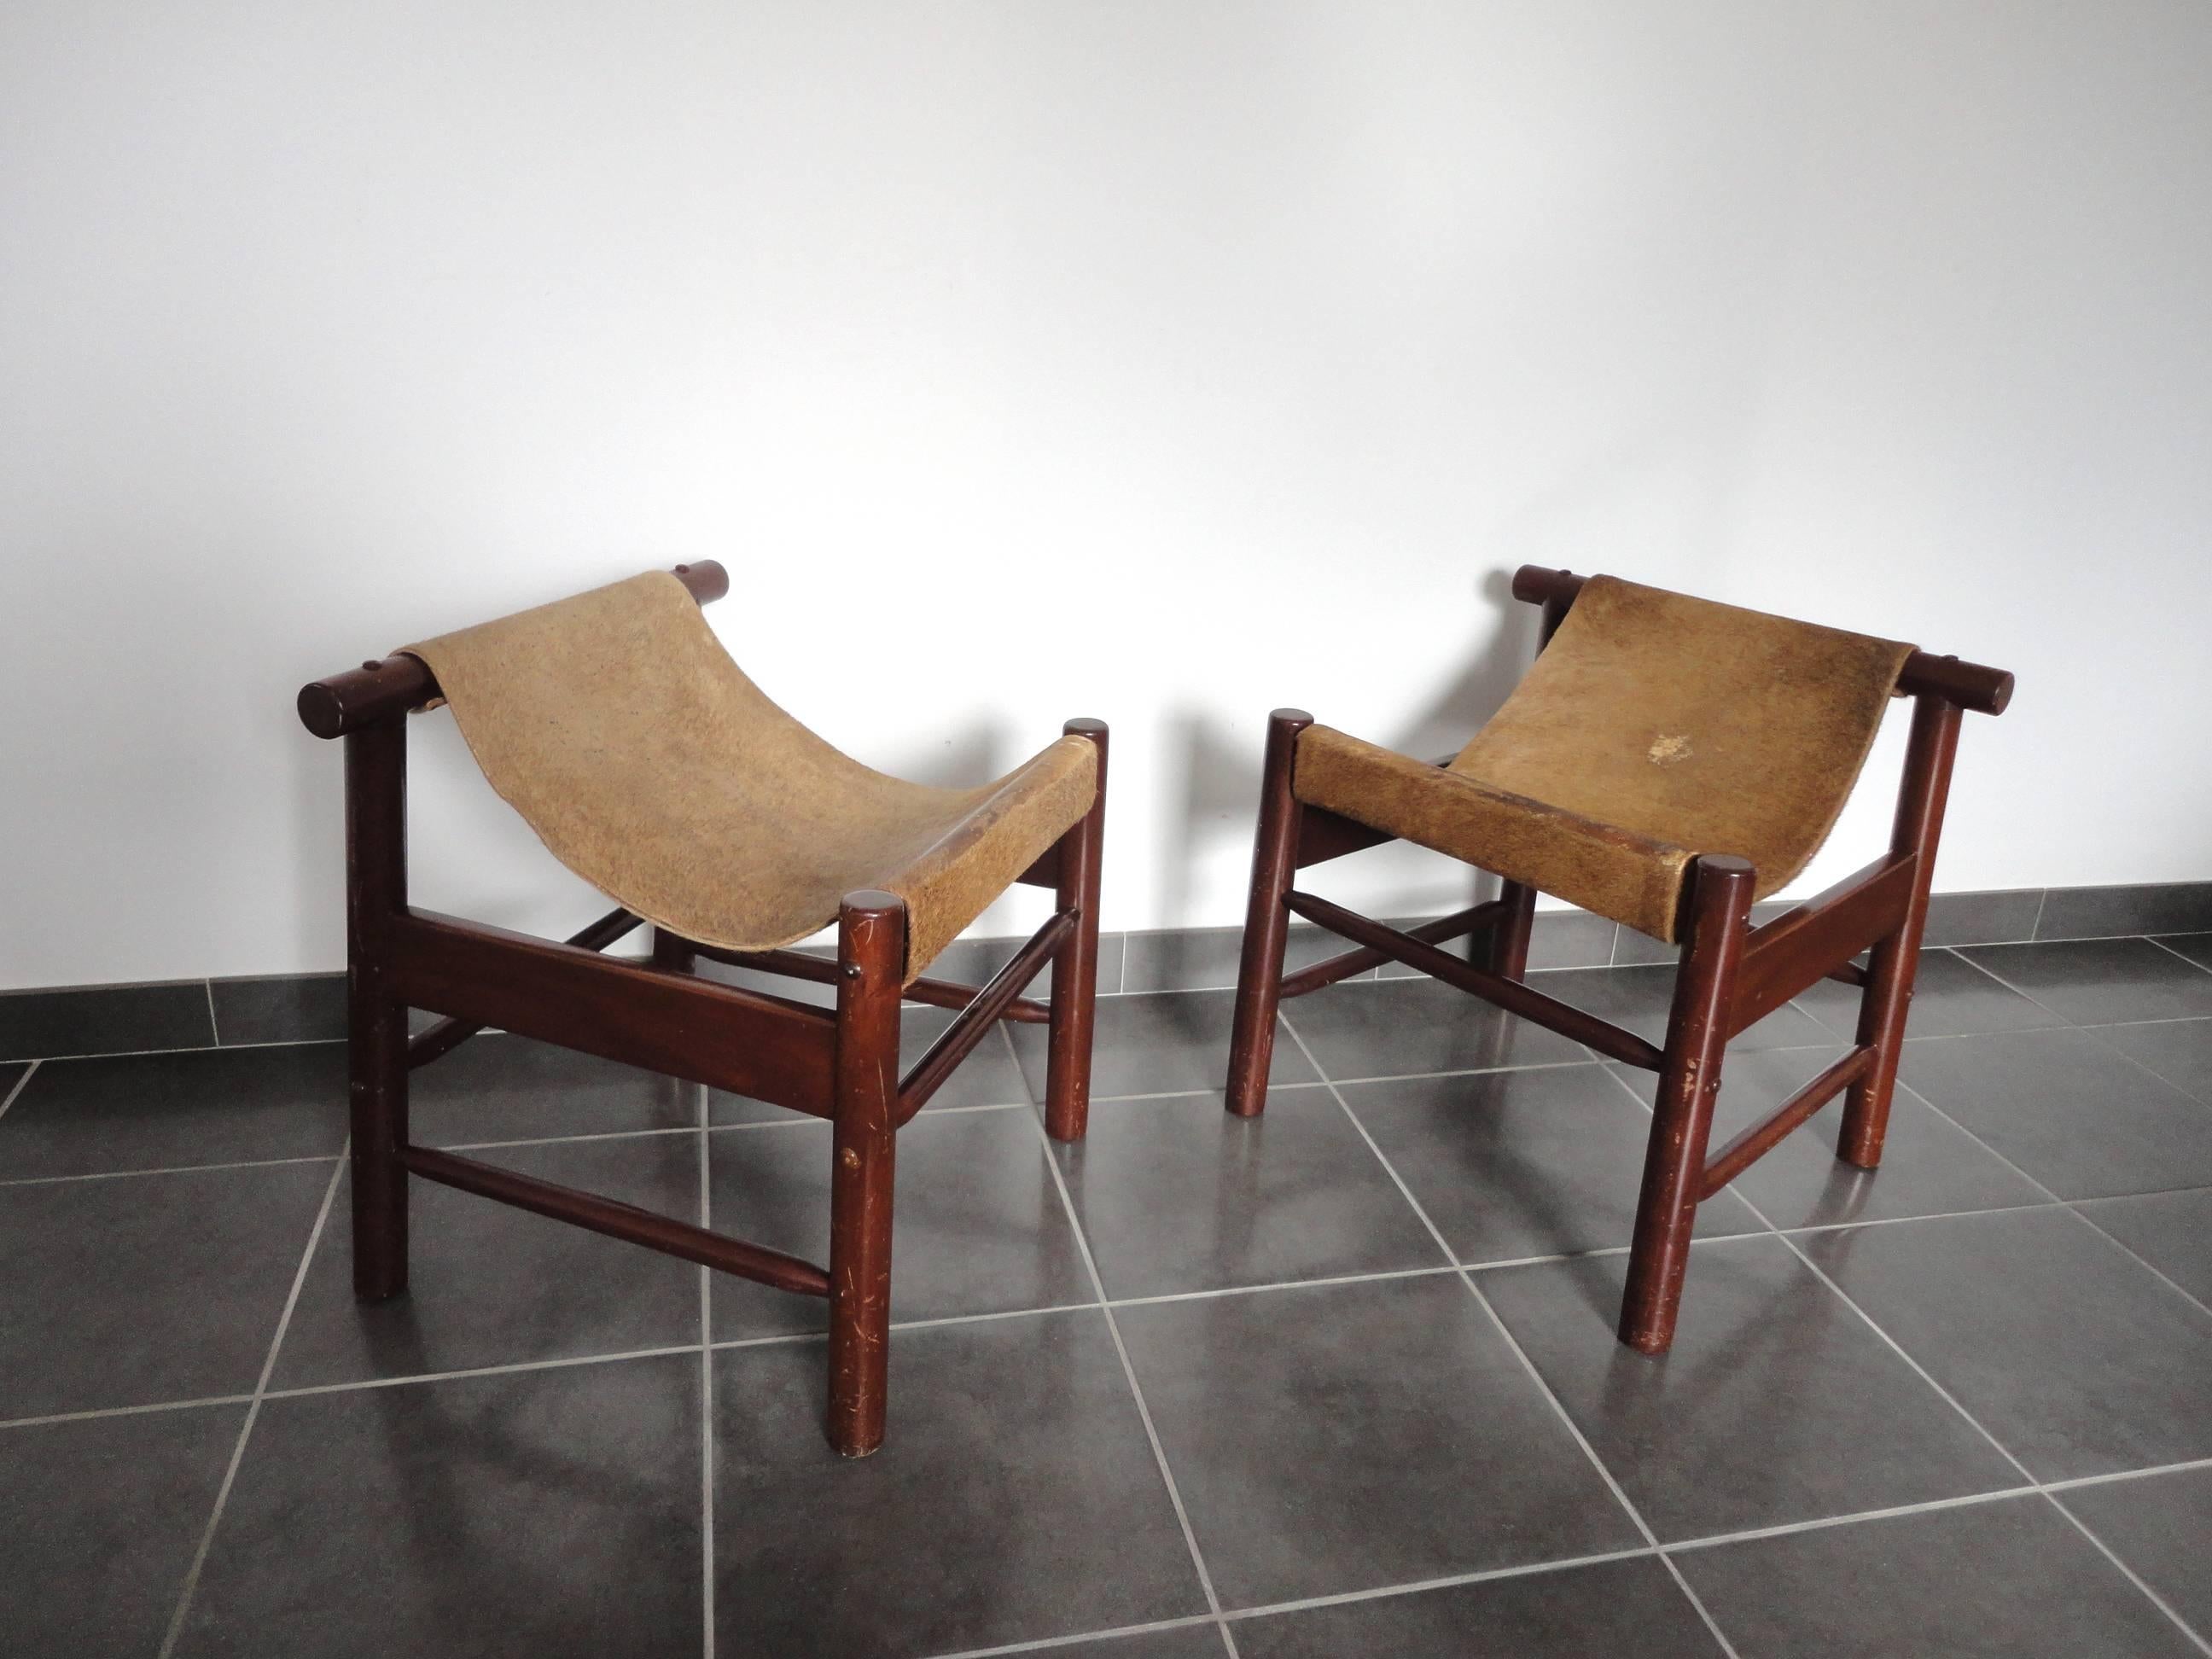 Pair of architectural stools made by Dujo Cuba in the 1970s.
The stools each feature a solid cuban mahogany wood frame with thick goatskin slung seat.
One of the stool has the Dujo Cuba original label,
circa 1970.